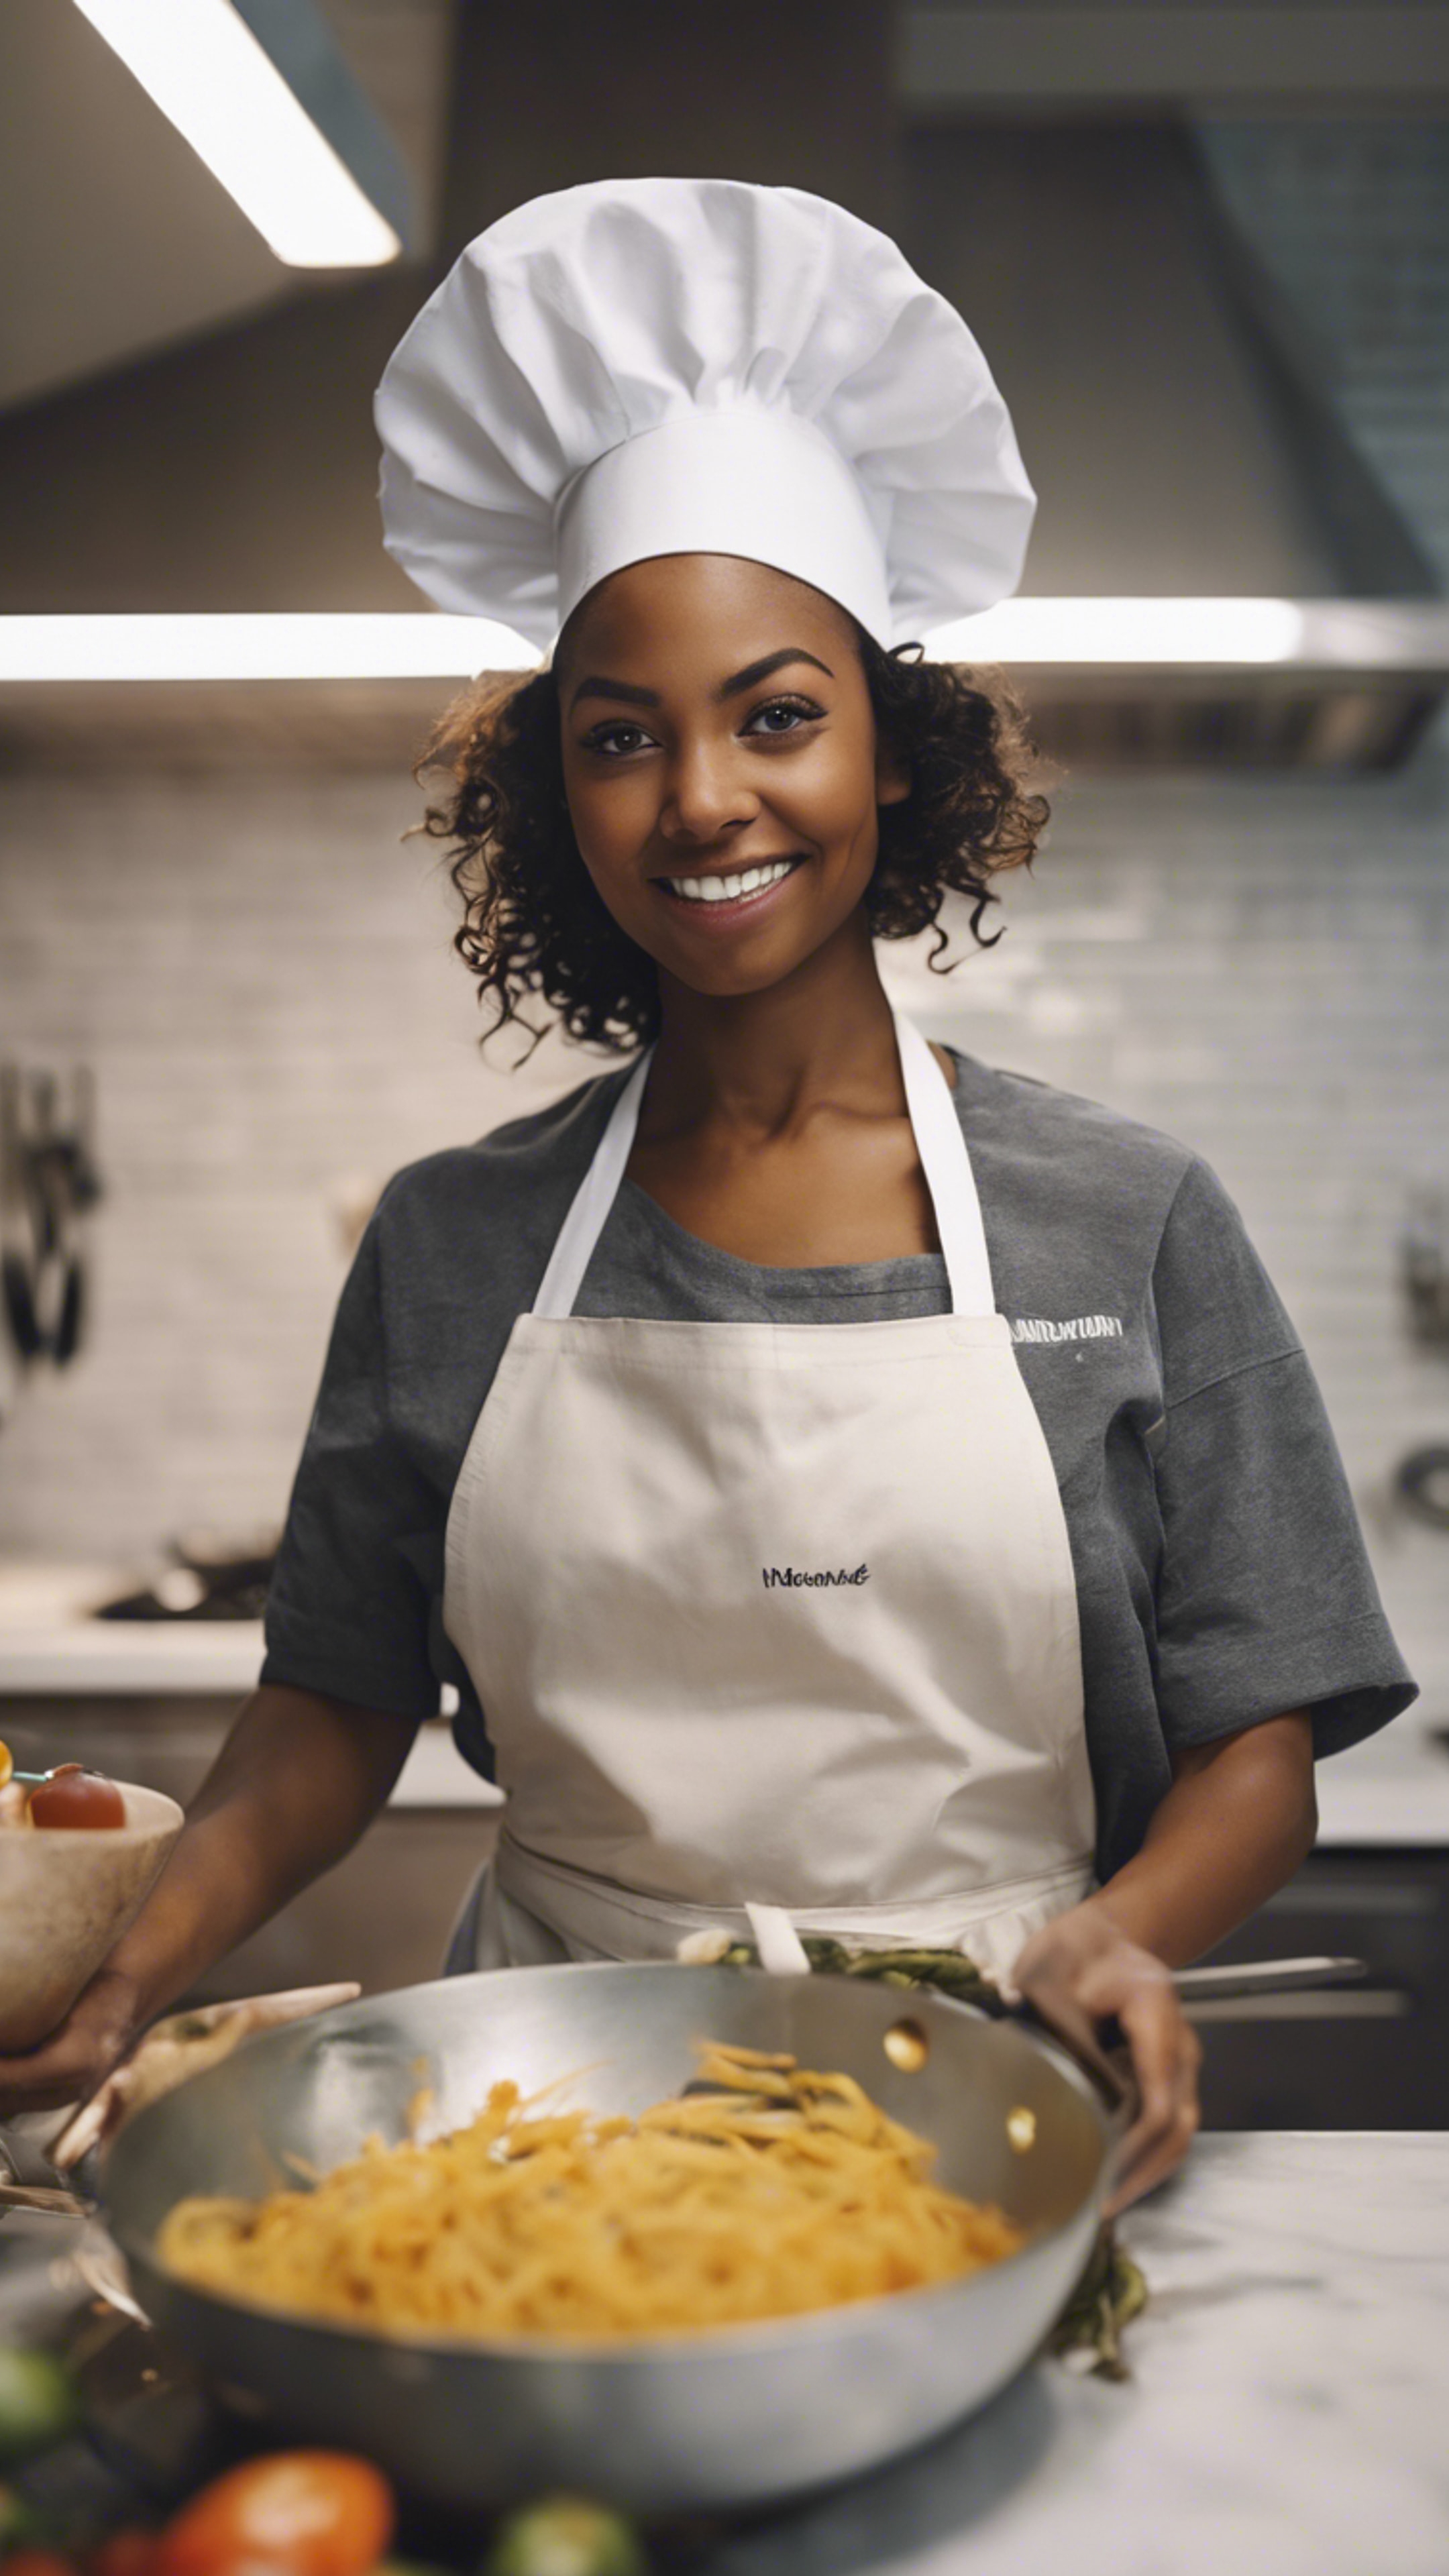 An enthusiastic black girl wearing chef’s hat and apron cooking in a modern kitchen. Tapet[28127f79c89b4e3a826e]